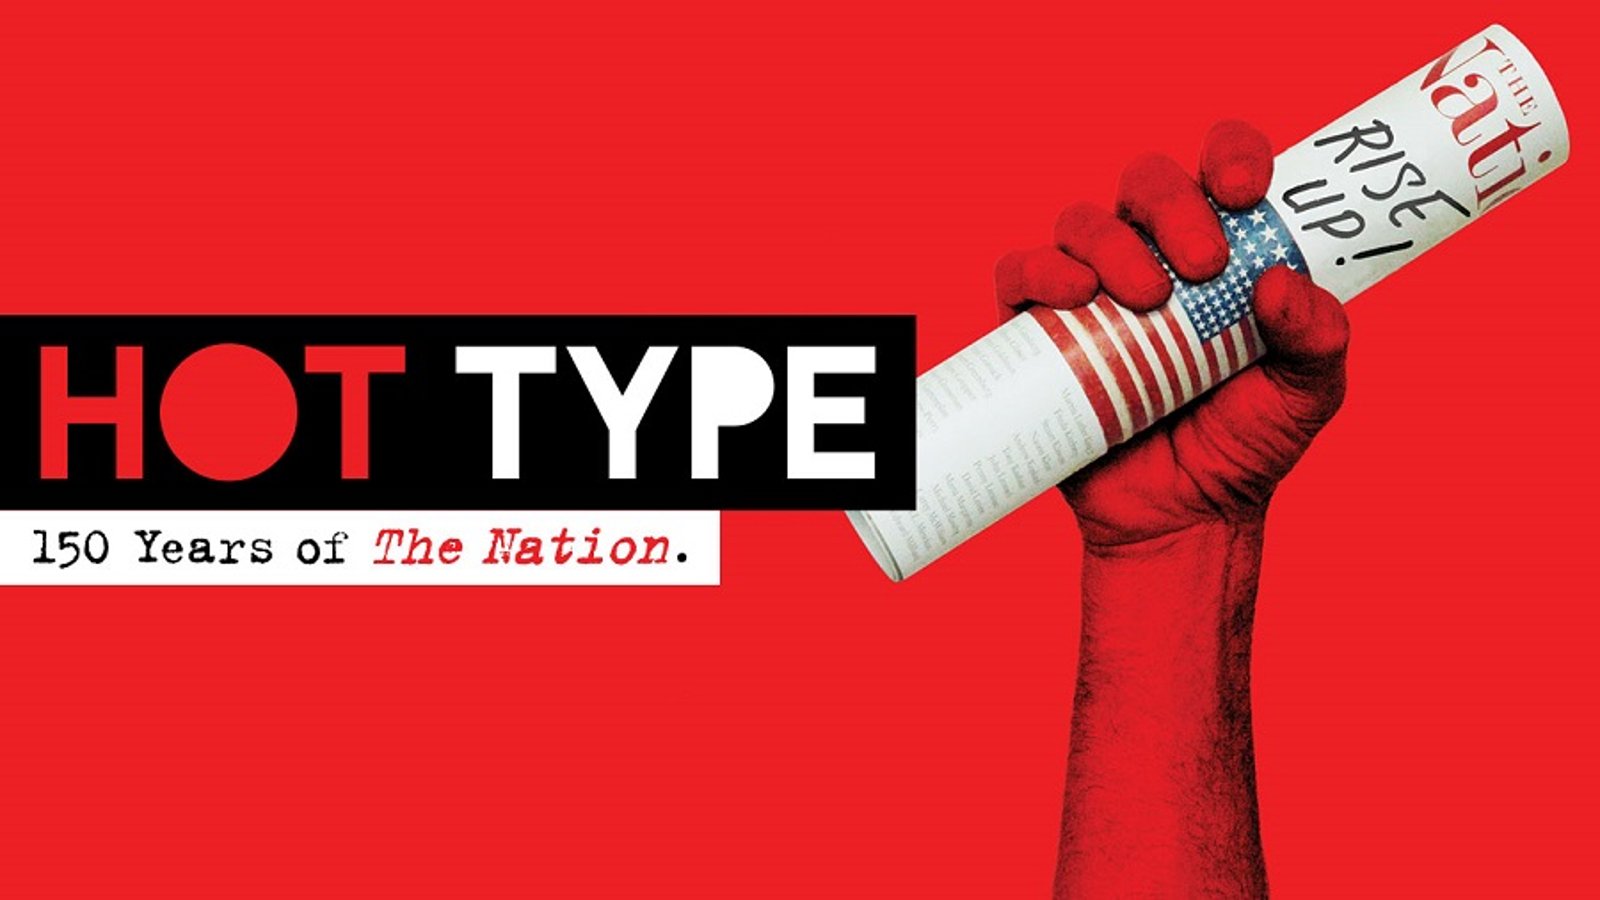 Hot Type - 150 Years Of The Nation Magazine